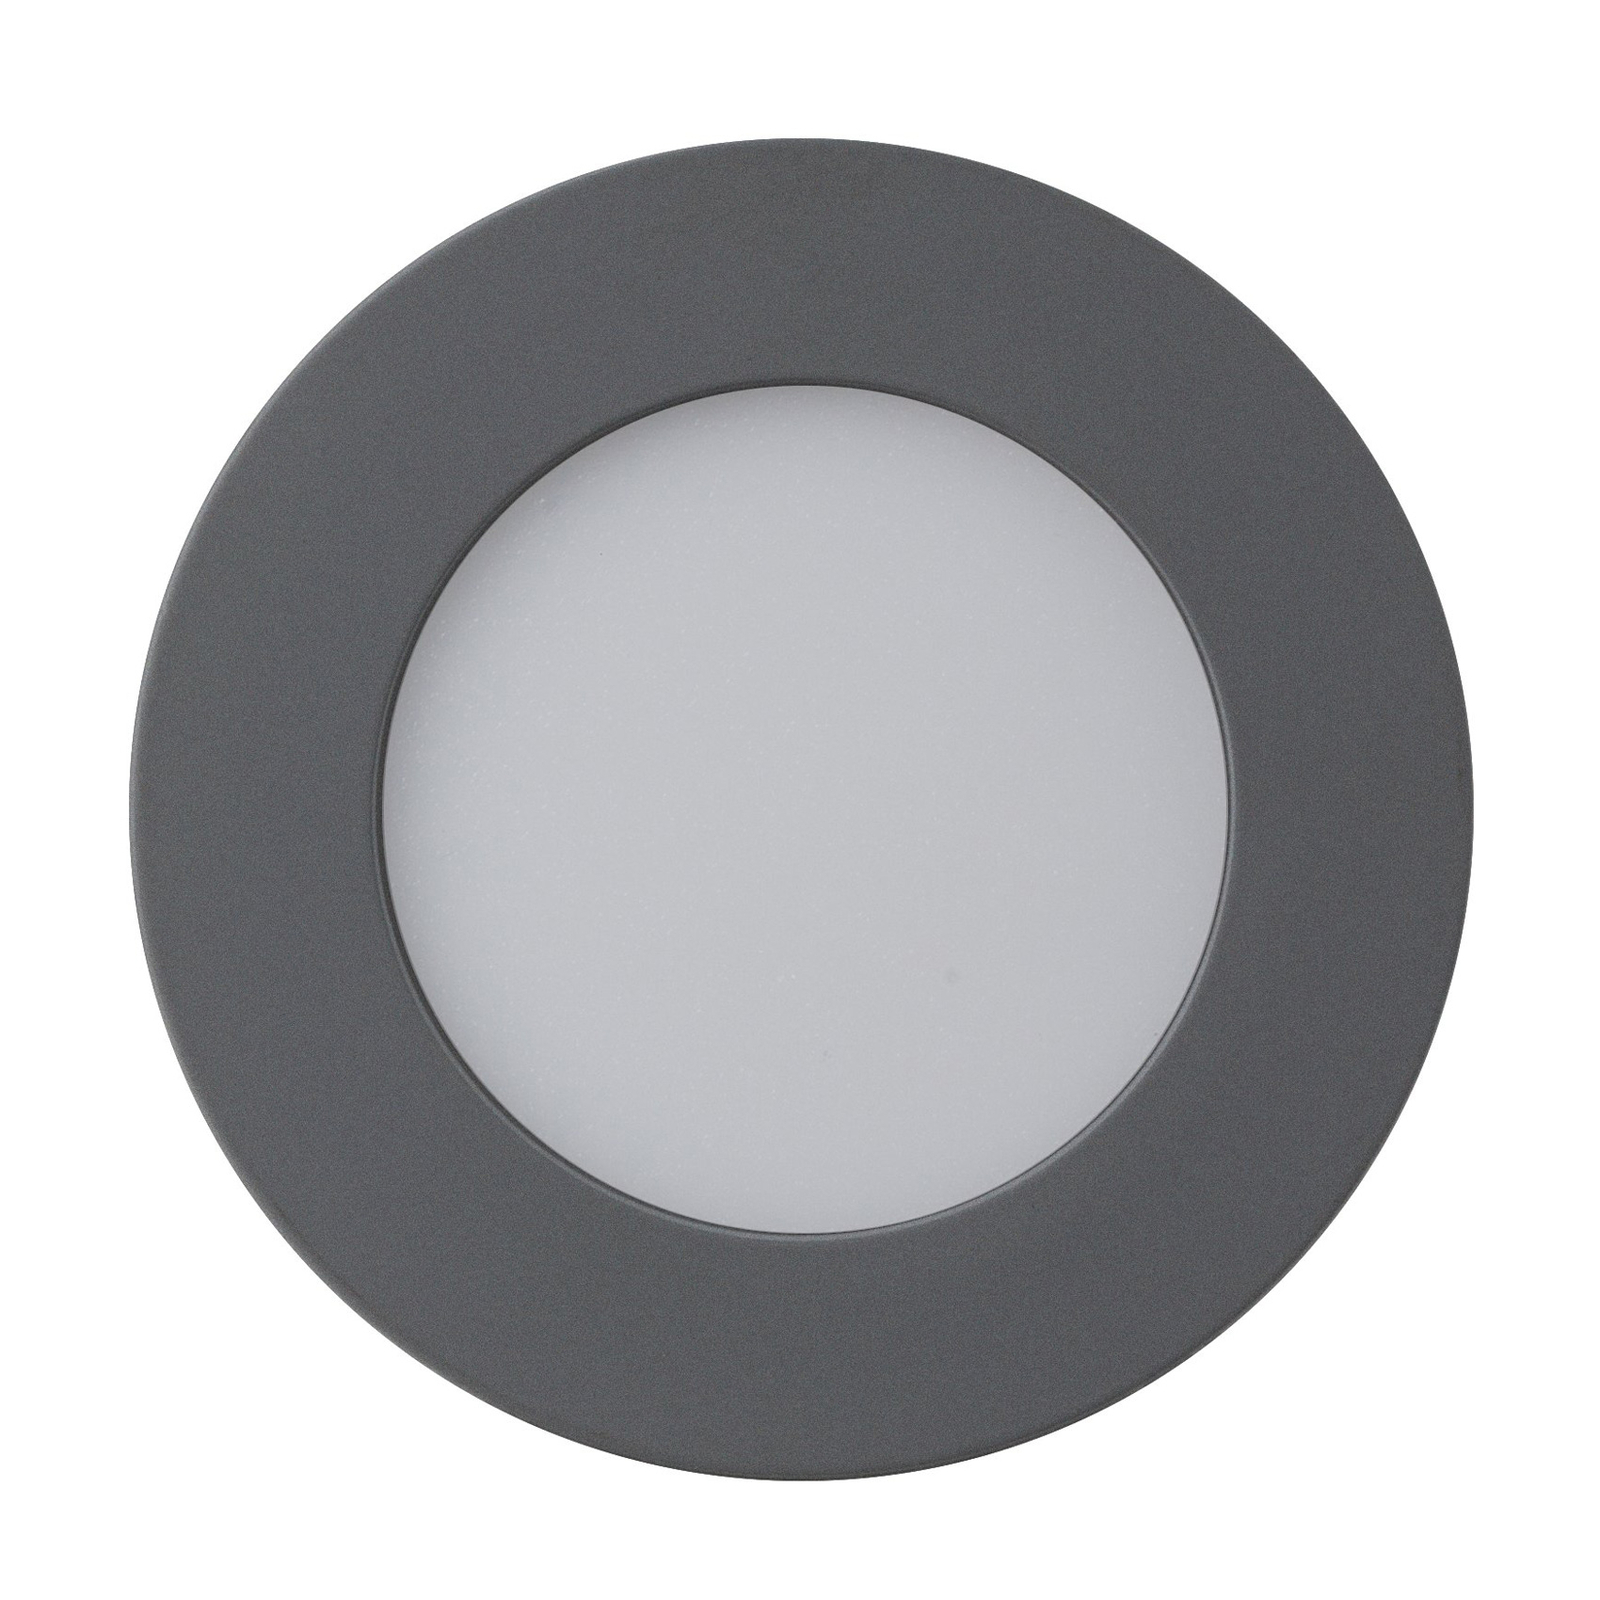 Lyon LED panel round Ø 16.8 cm dimmable